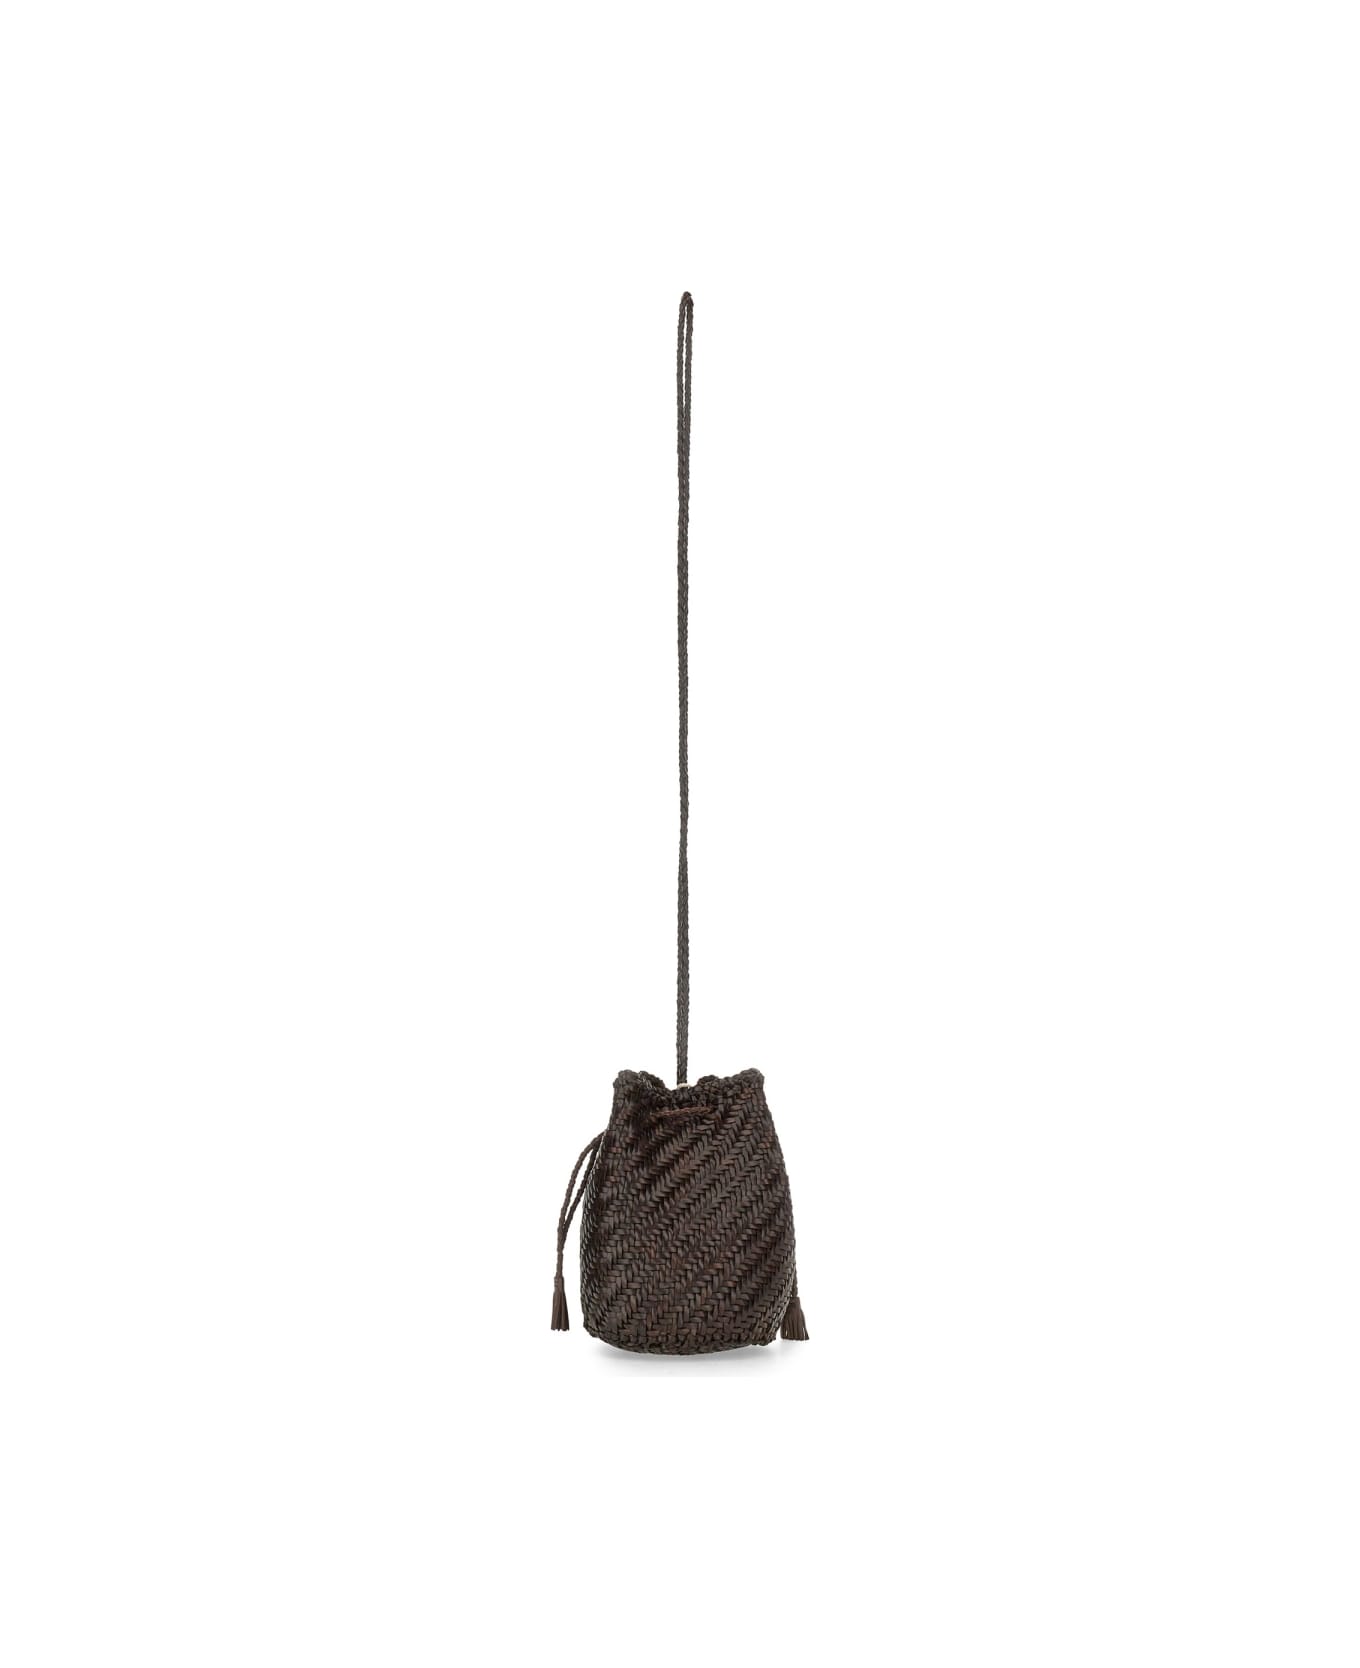 Dragon Diffusion "pompom Double Jump Tan" Bag - BROWN トートバッグ